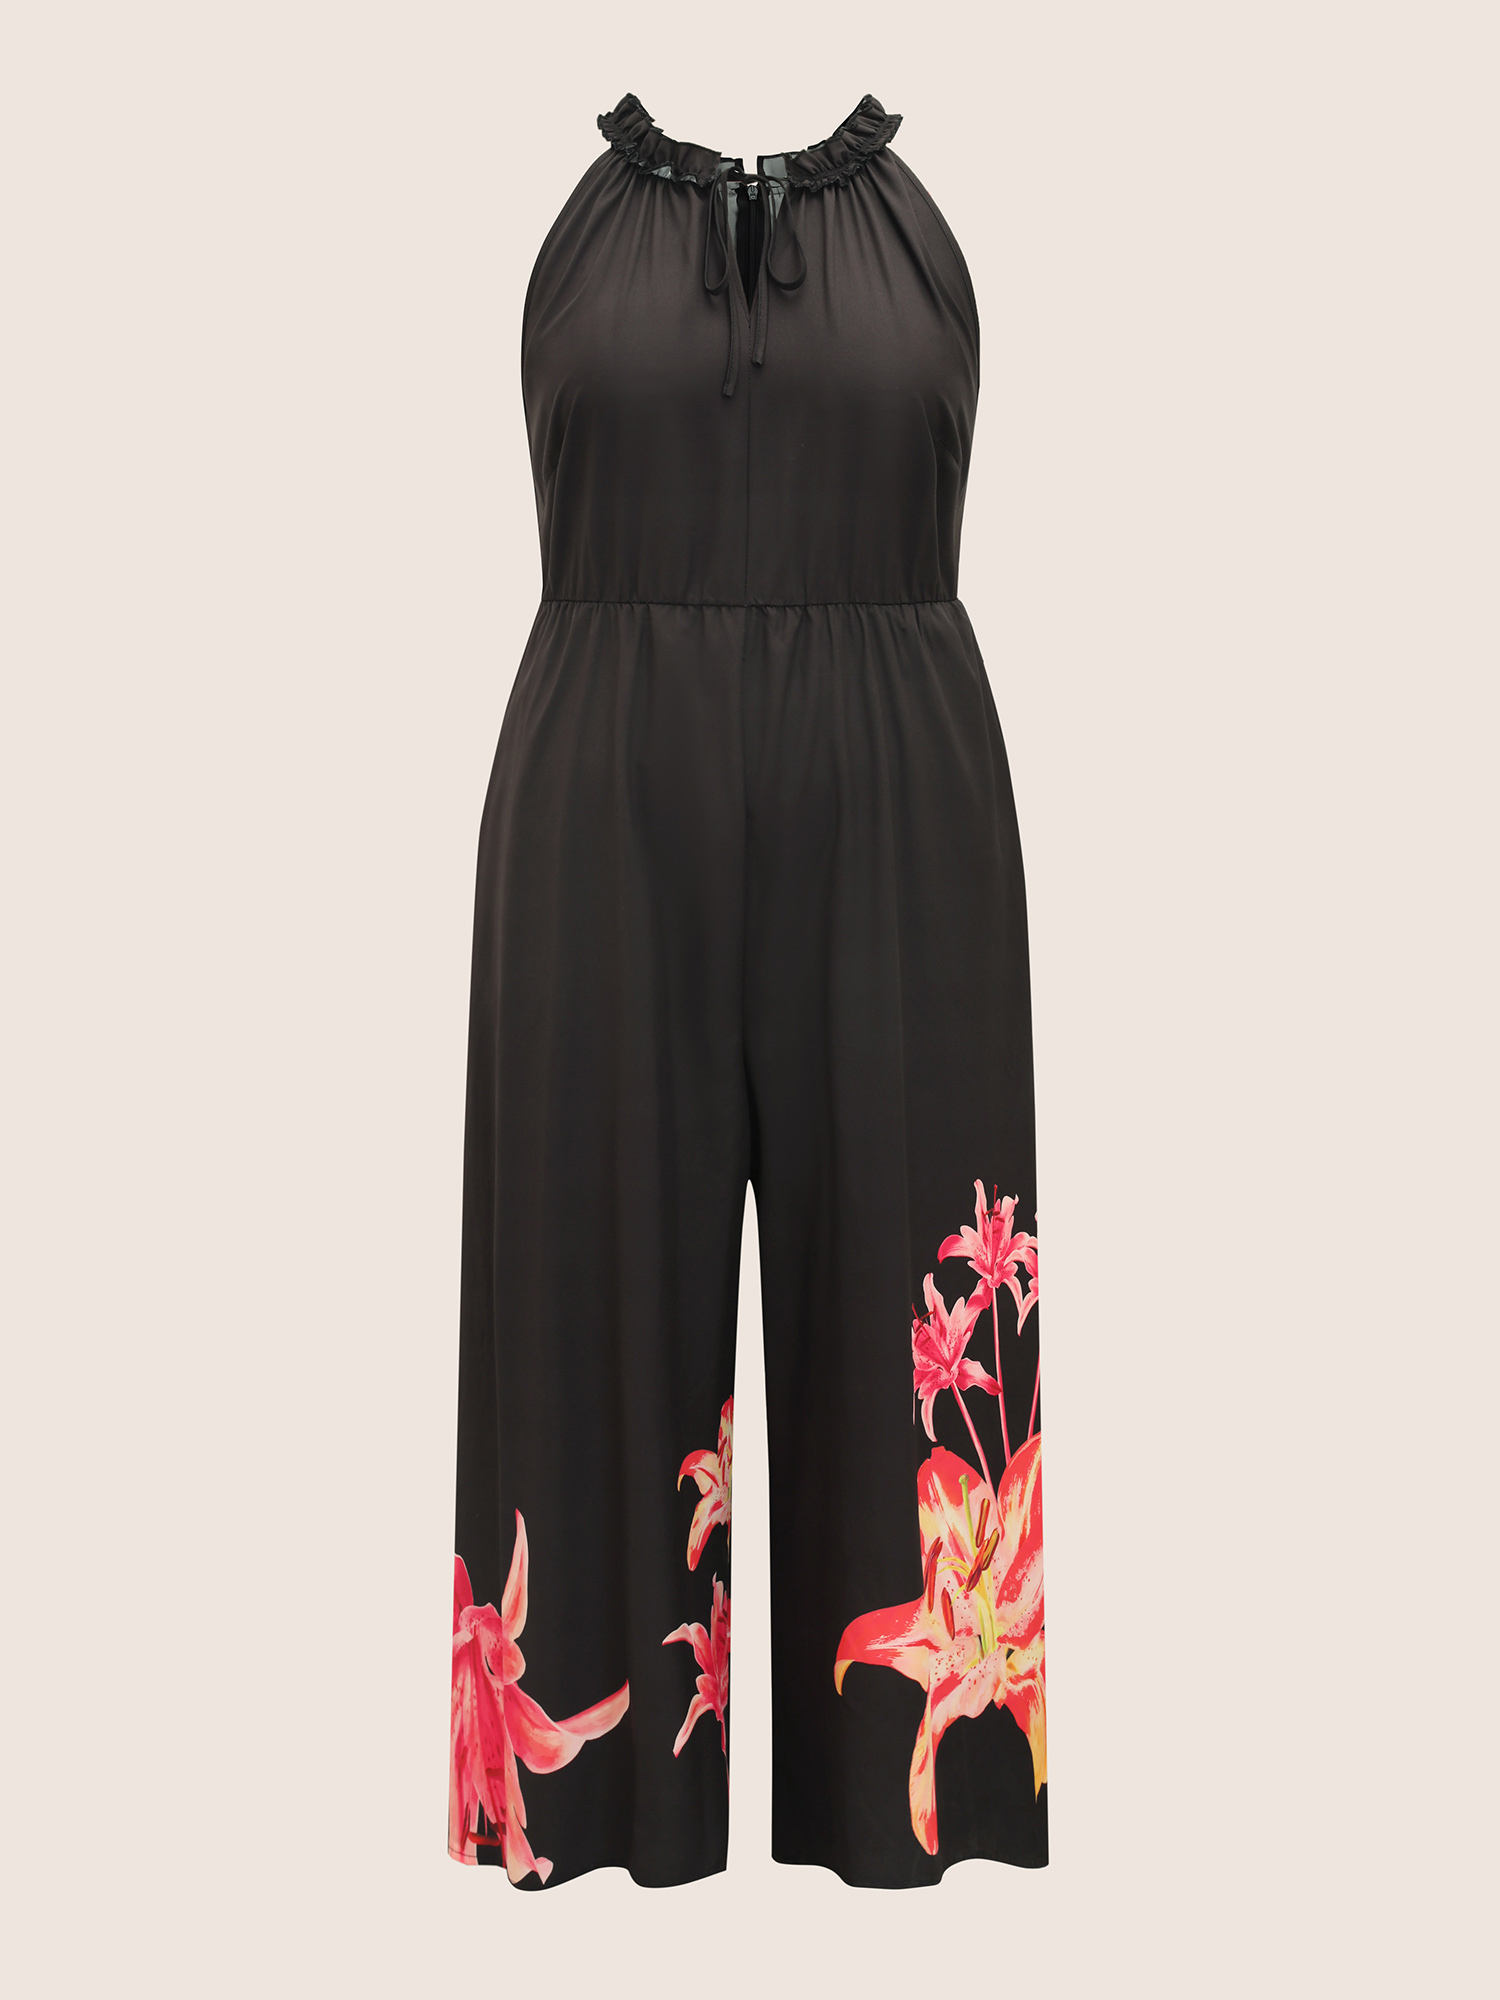 

Plus Size Black Lily Print Frill Trim Tie Knot Jumpsuit Women Elegant Sleeveless Round Neck Everyday Loose Jumpsuits BloomChic